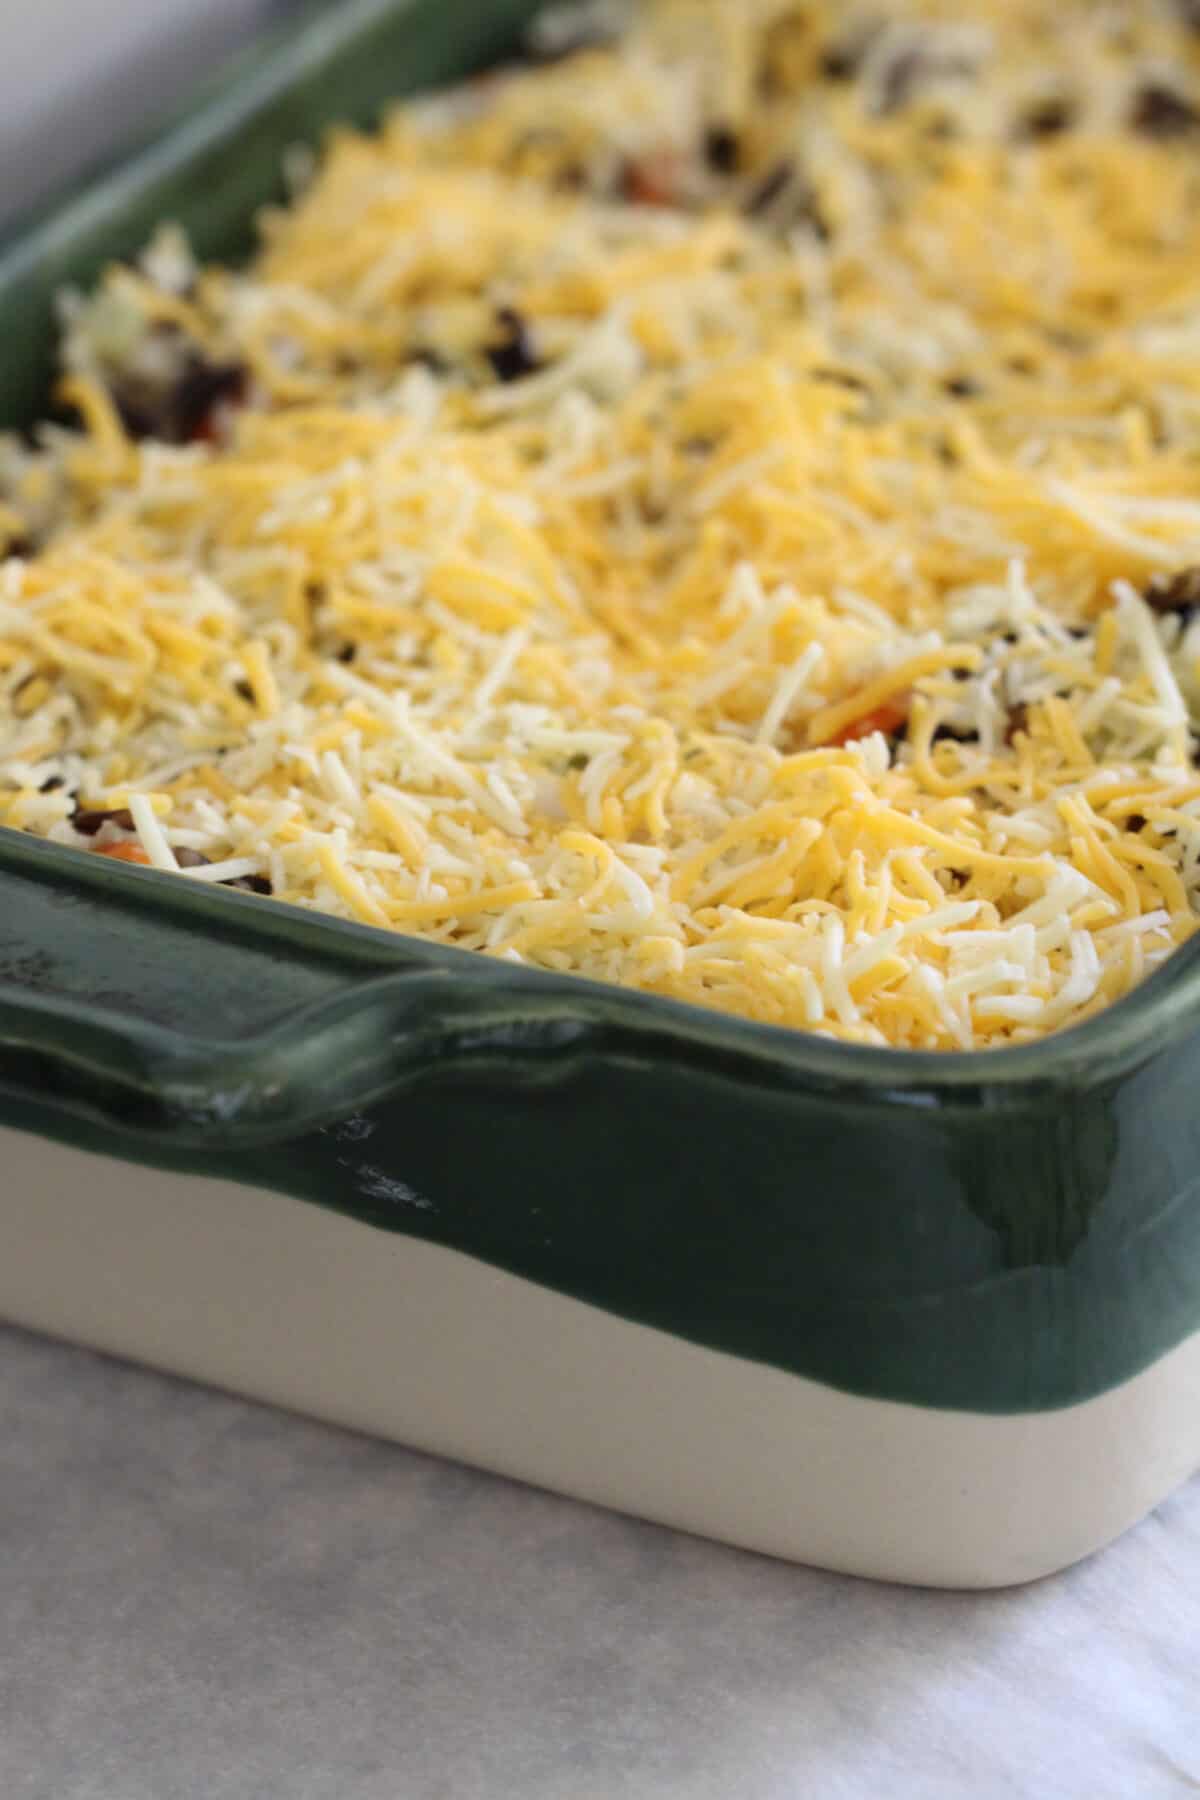 shredded cheese added to top of chicken and rice casserole